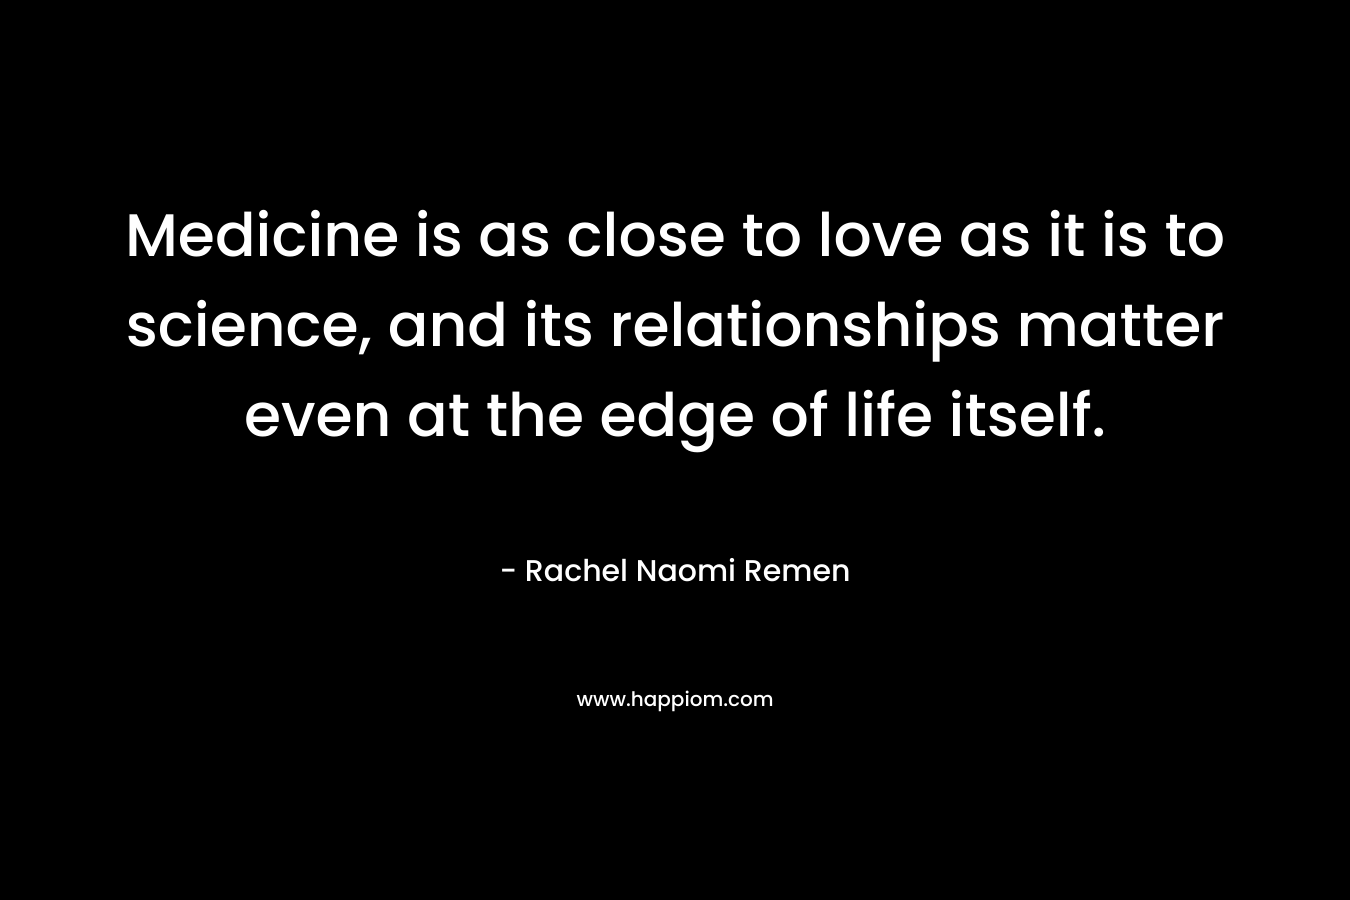 Medicine is as close to love as it is to science, and its relationships matter even at the edge of life itself. – Rachel Naomi Remen